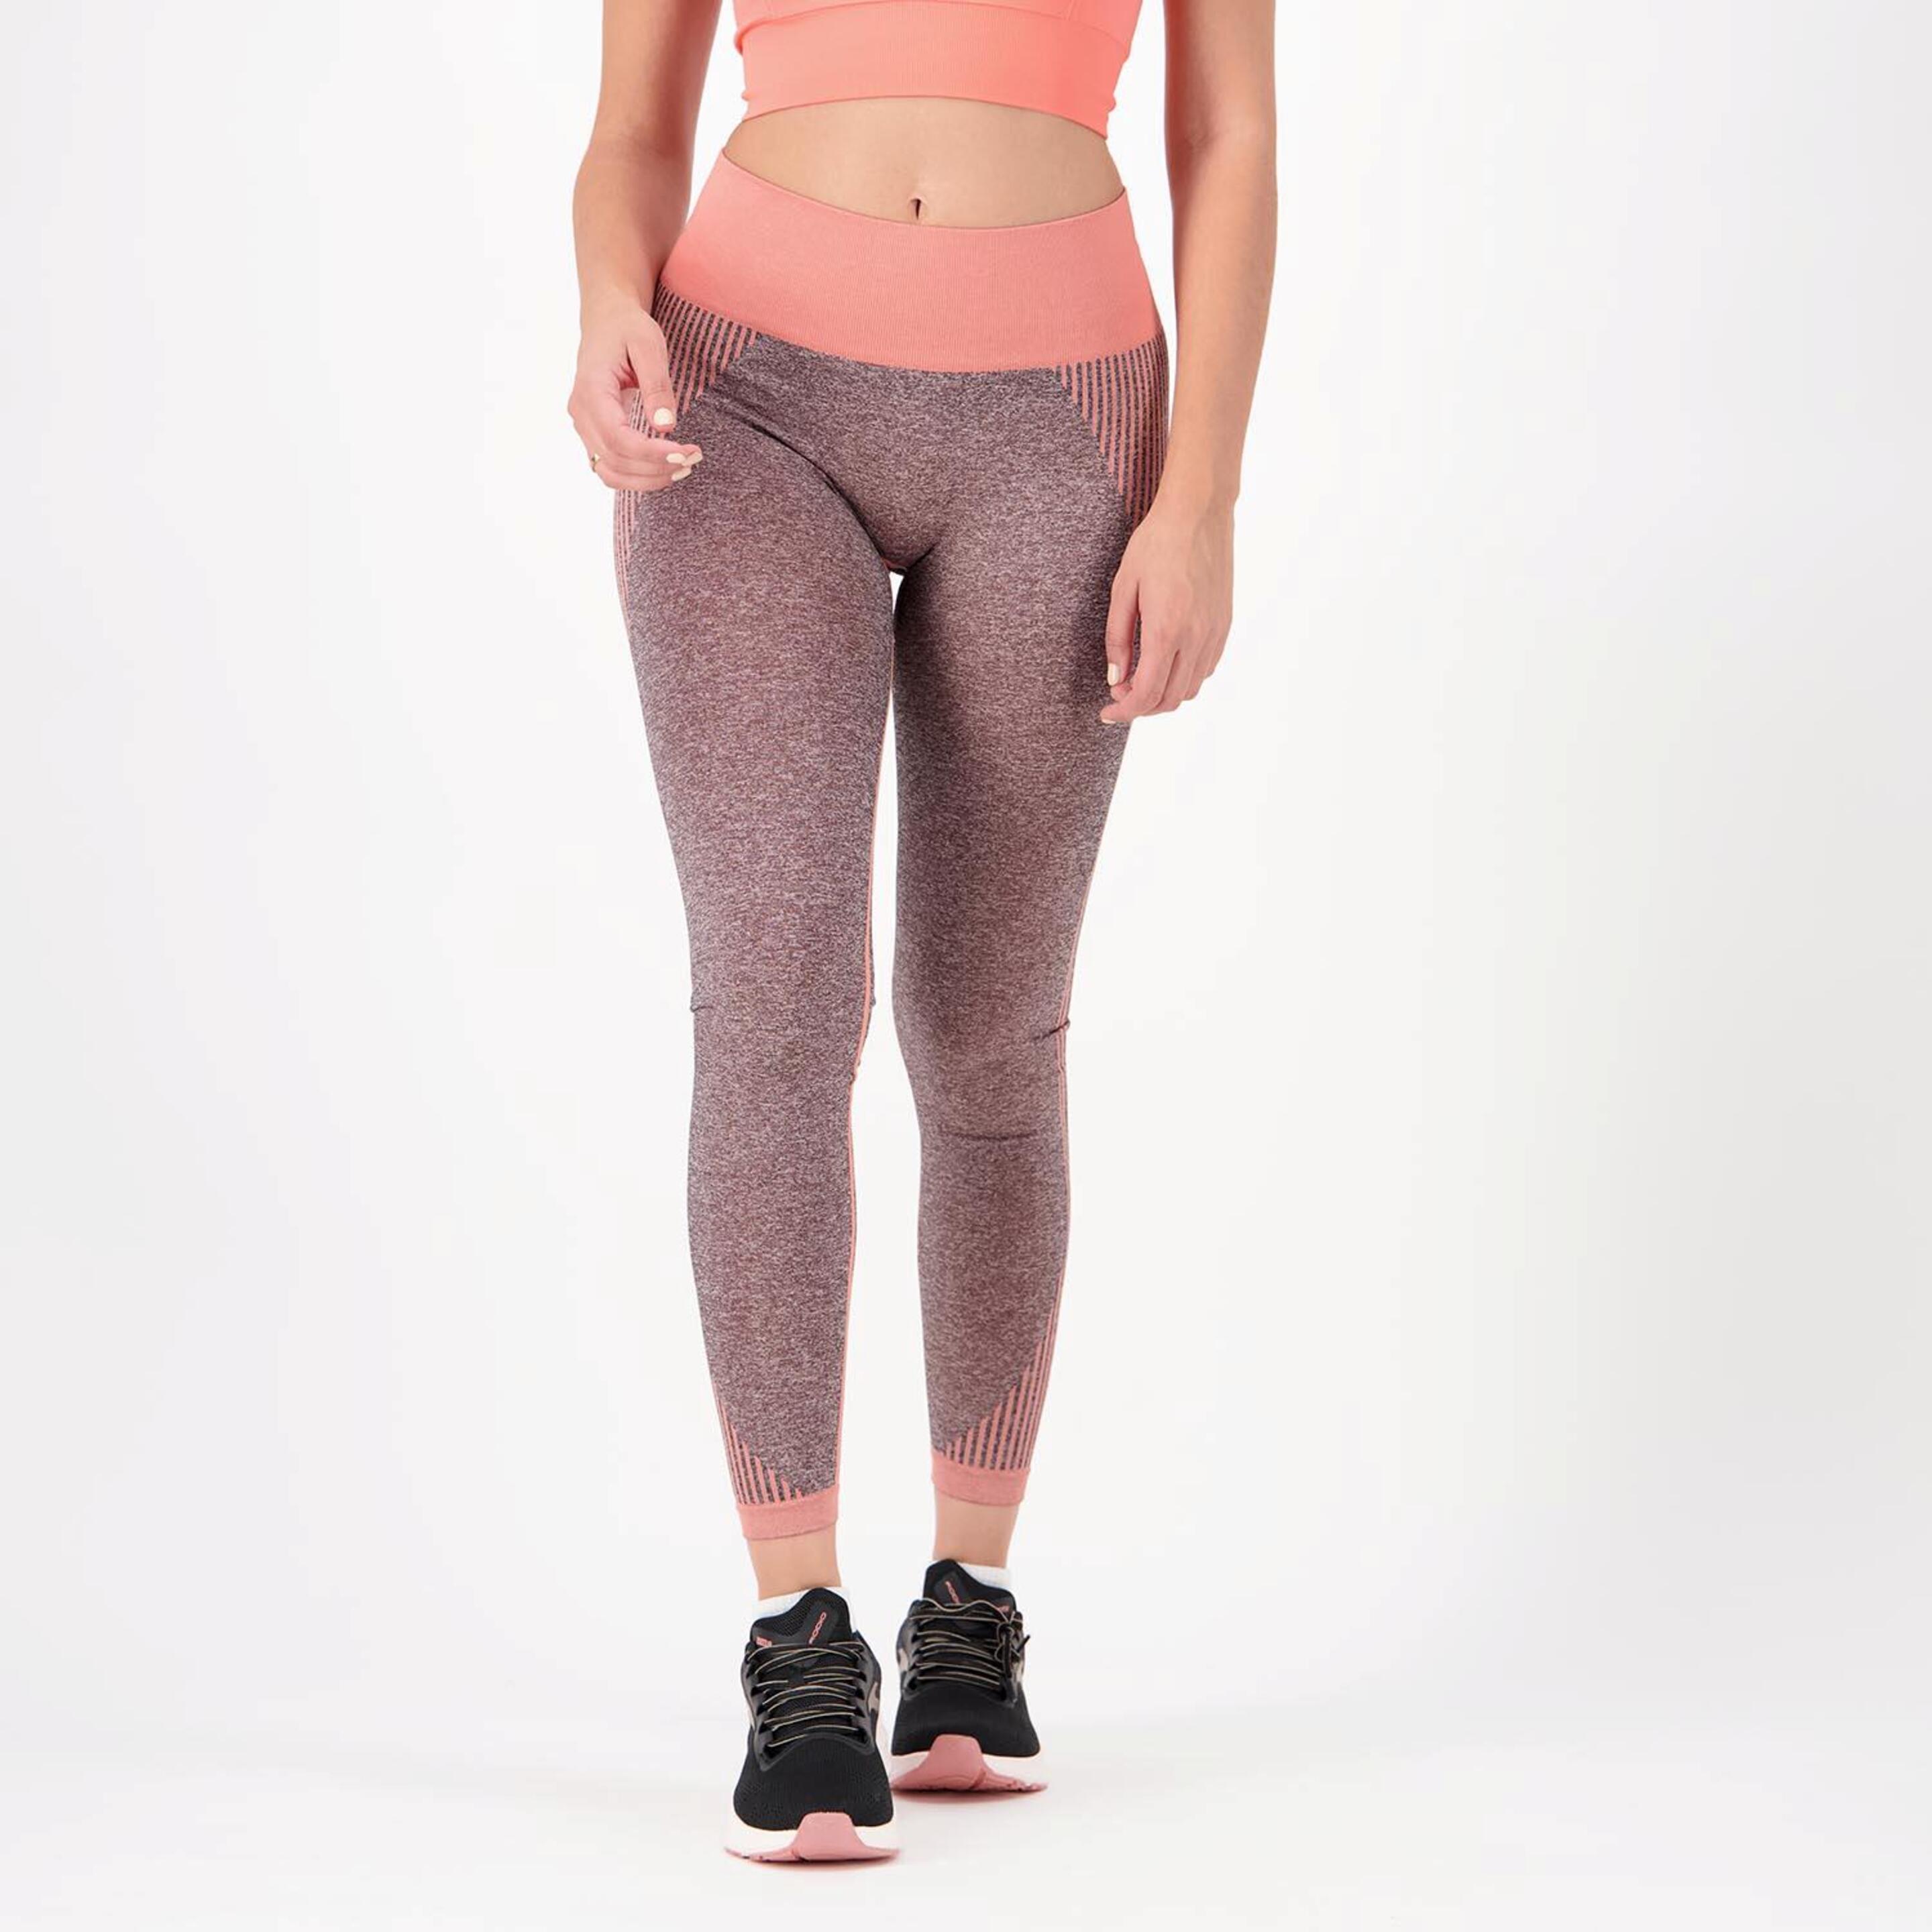 Doone Supportive - gris - Leggings Ginásio Mulher